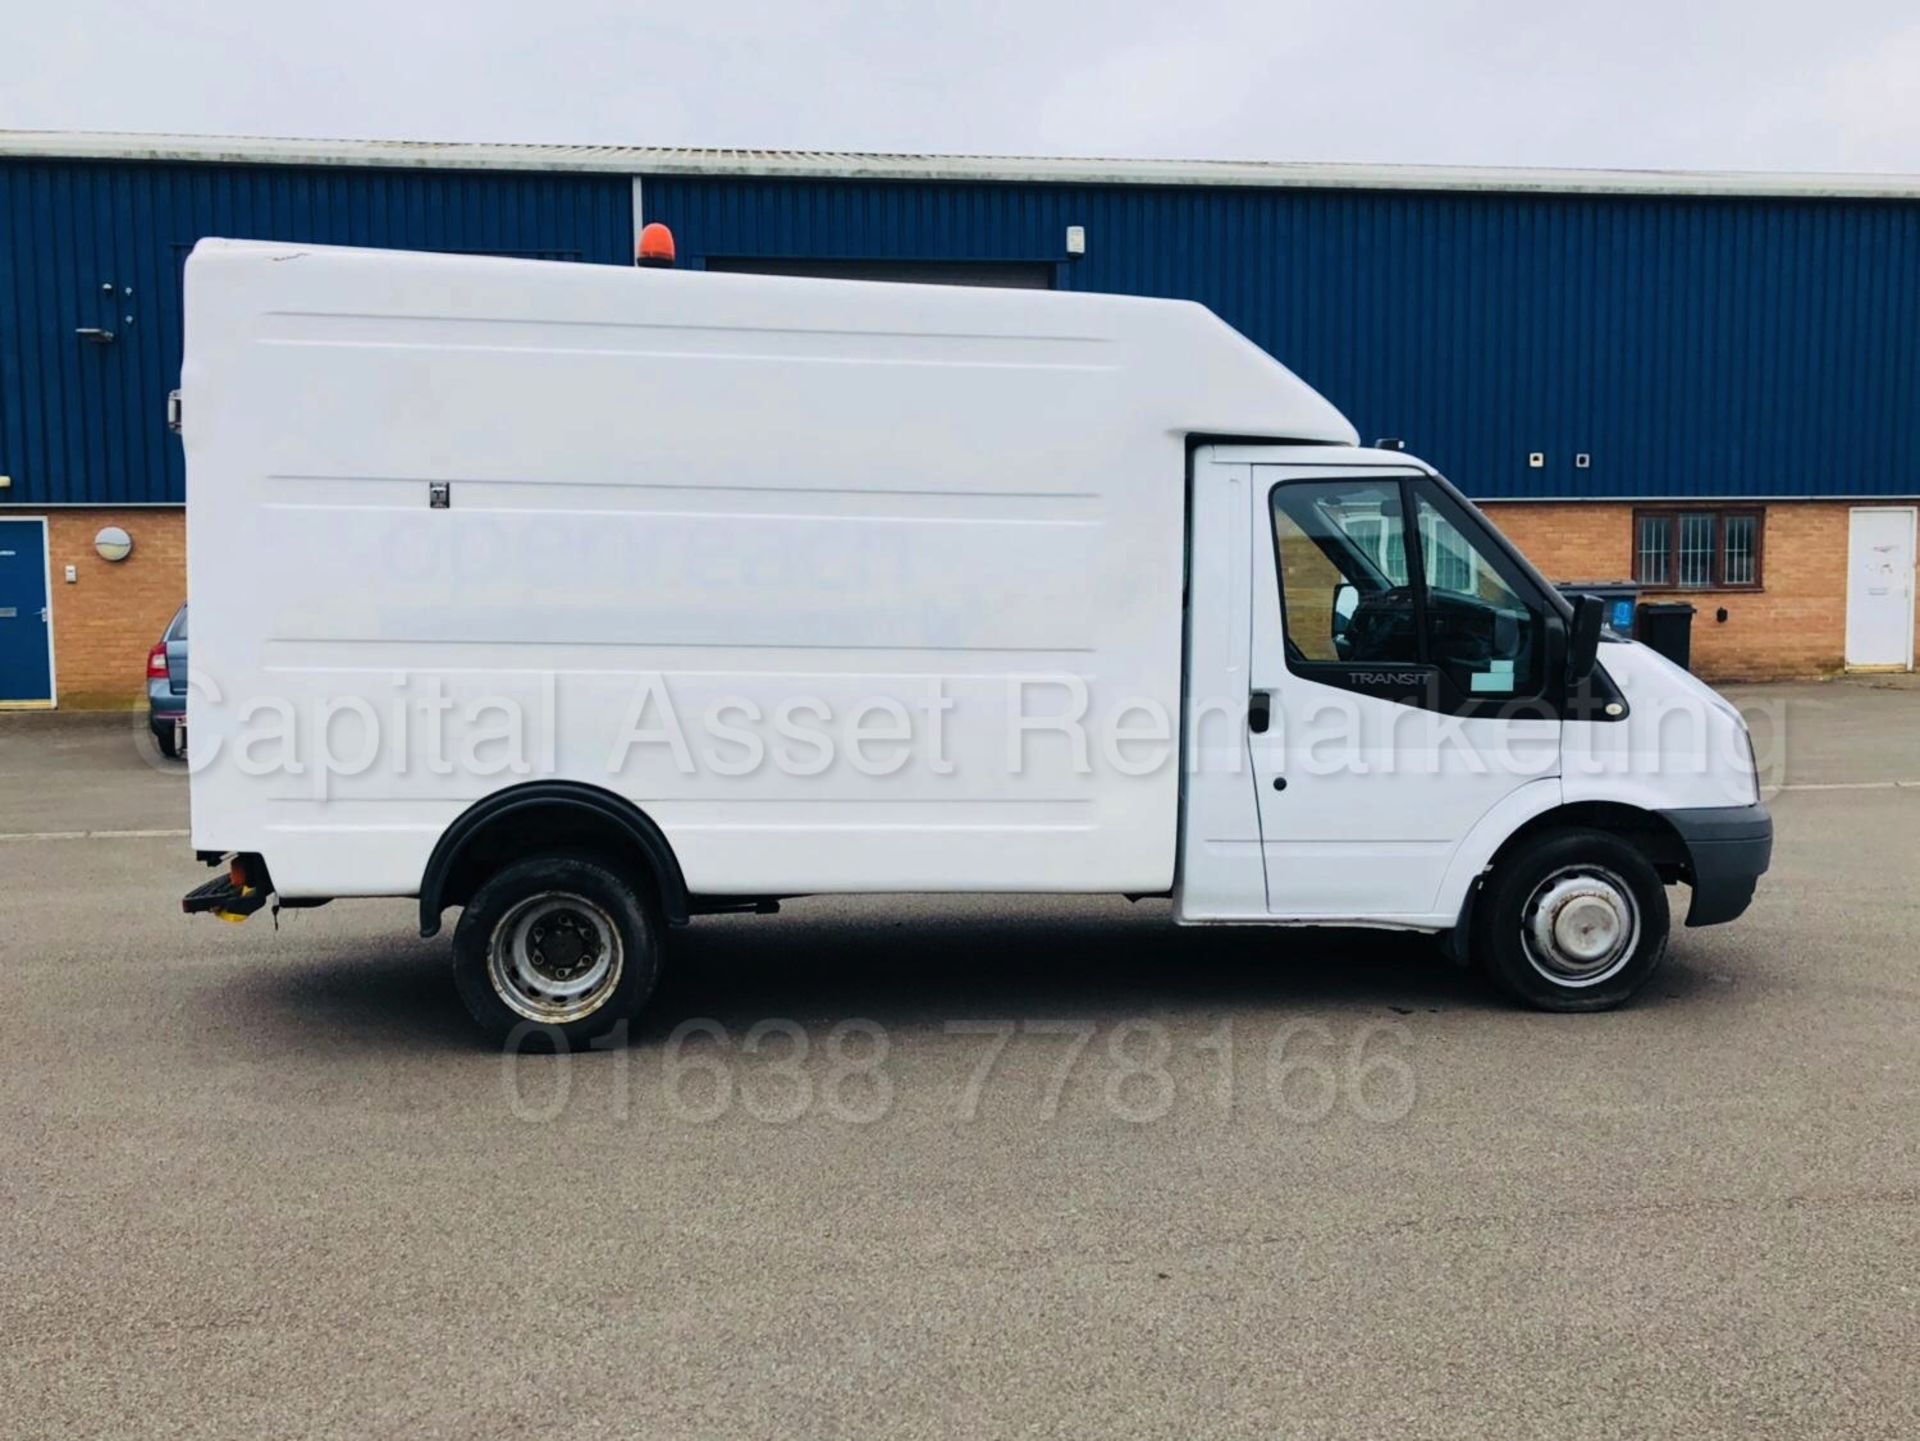 (On Sale) FORD TRANSIT 100 350 'BOX / LUTON VAN' (2010) '2.4 TDCI - 100 BHP' (1 COMPANY OWNER) - Image 20 of 29